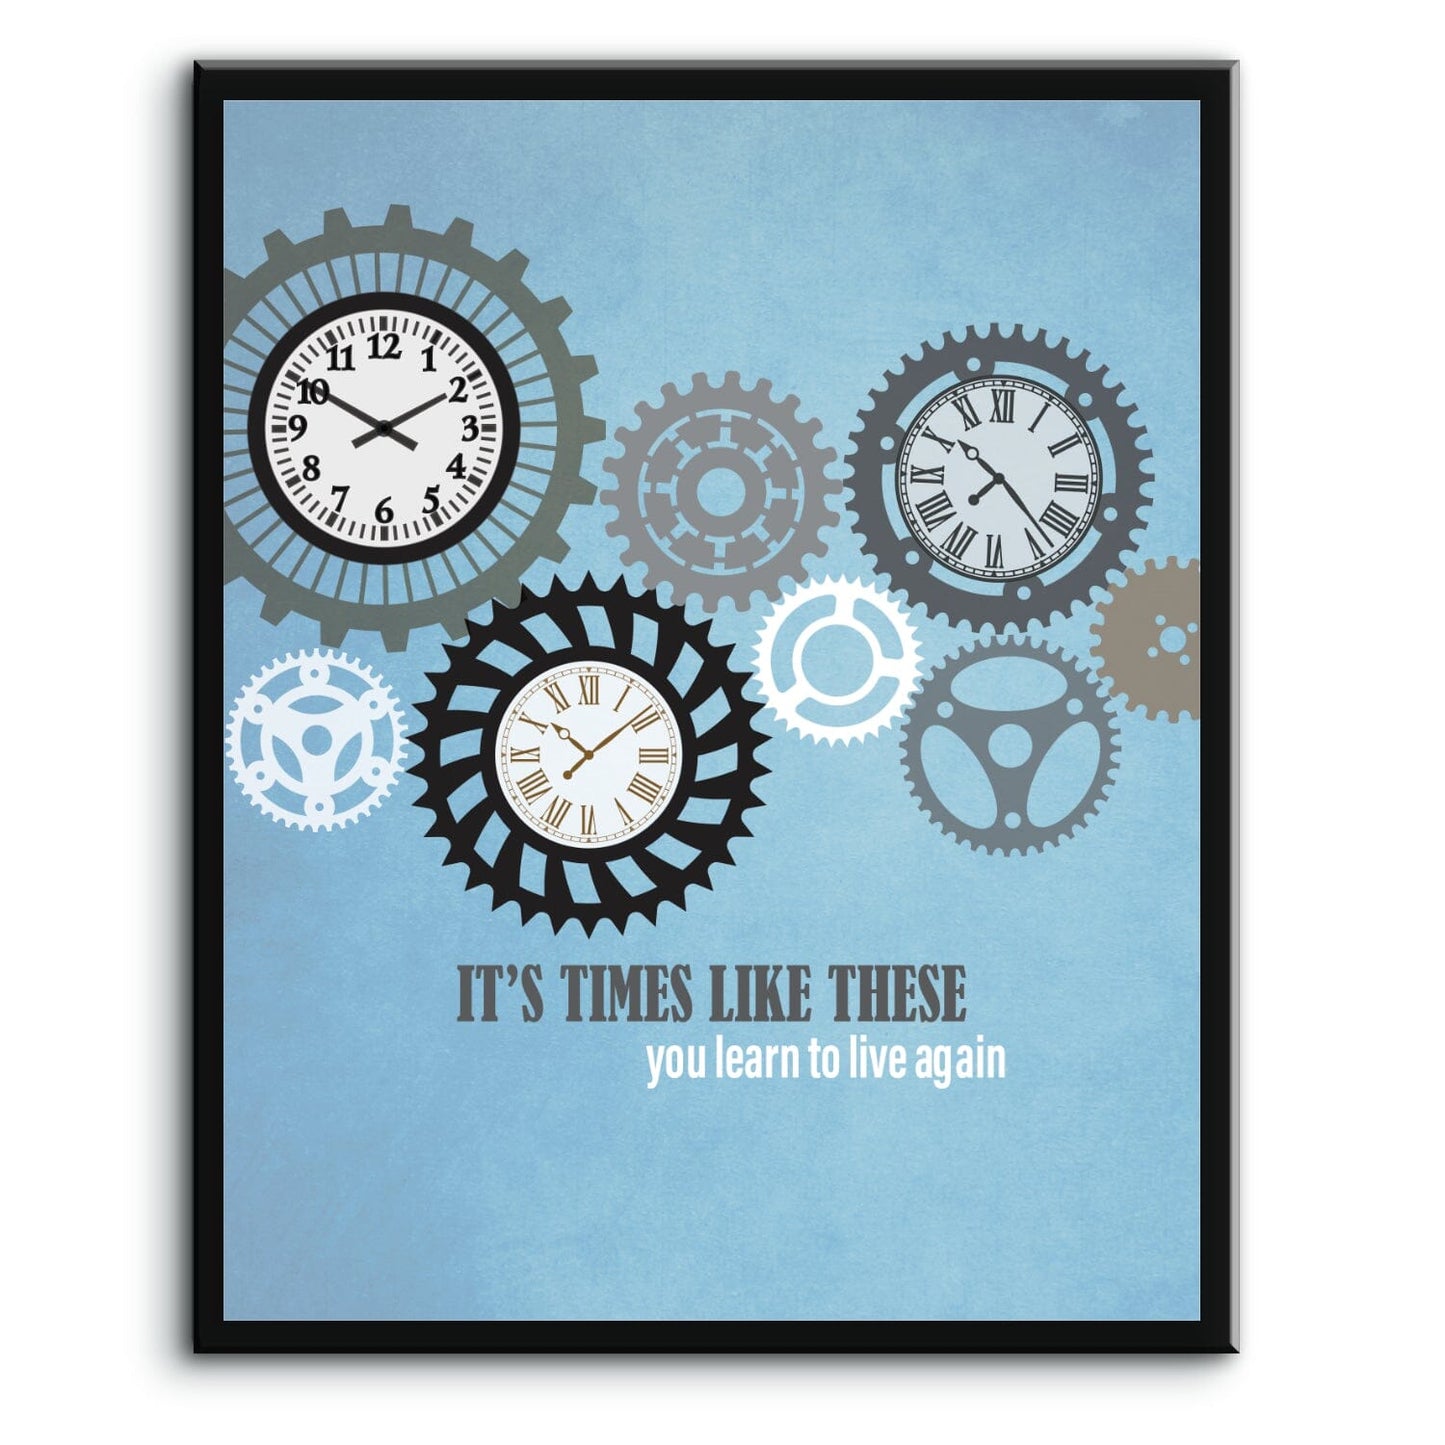 Times Like These by Foo Fighters - Song Lyric Art Print Song Lyrics Art Song Lyrics Art 8x10 Plaque Mount 